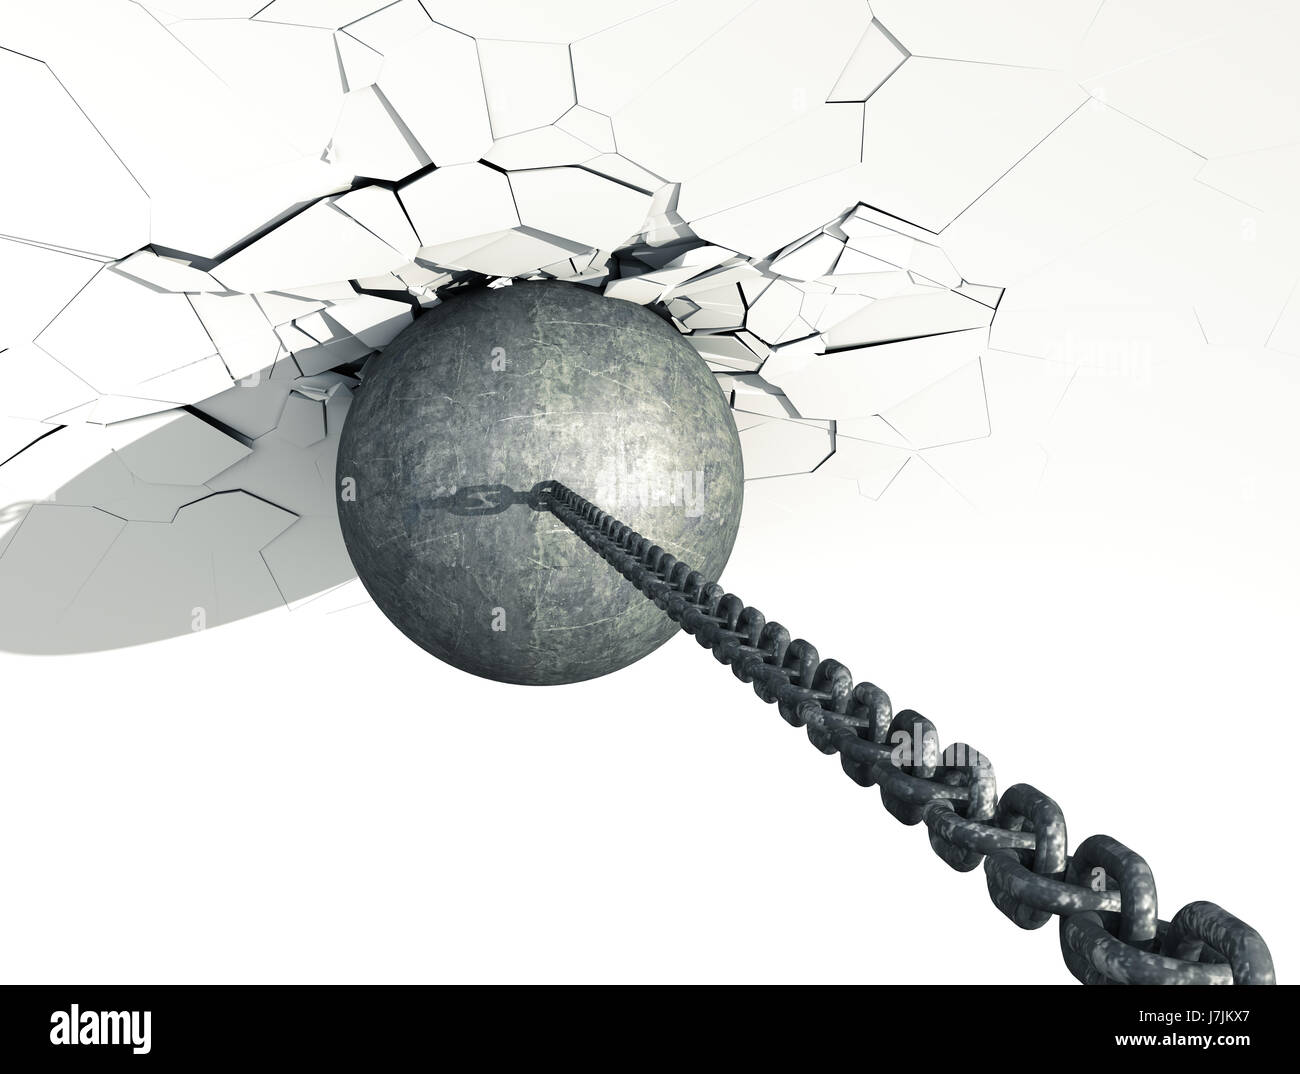 Metallic Wrecking Ball Shattering White Wall. Top view. 3D Illustration. Stock Photo